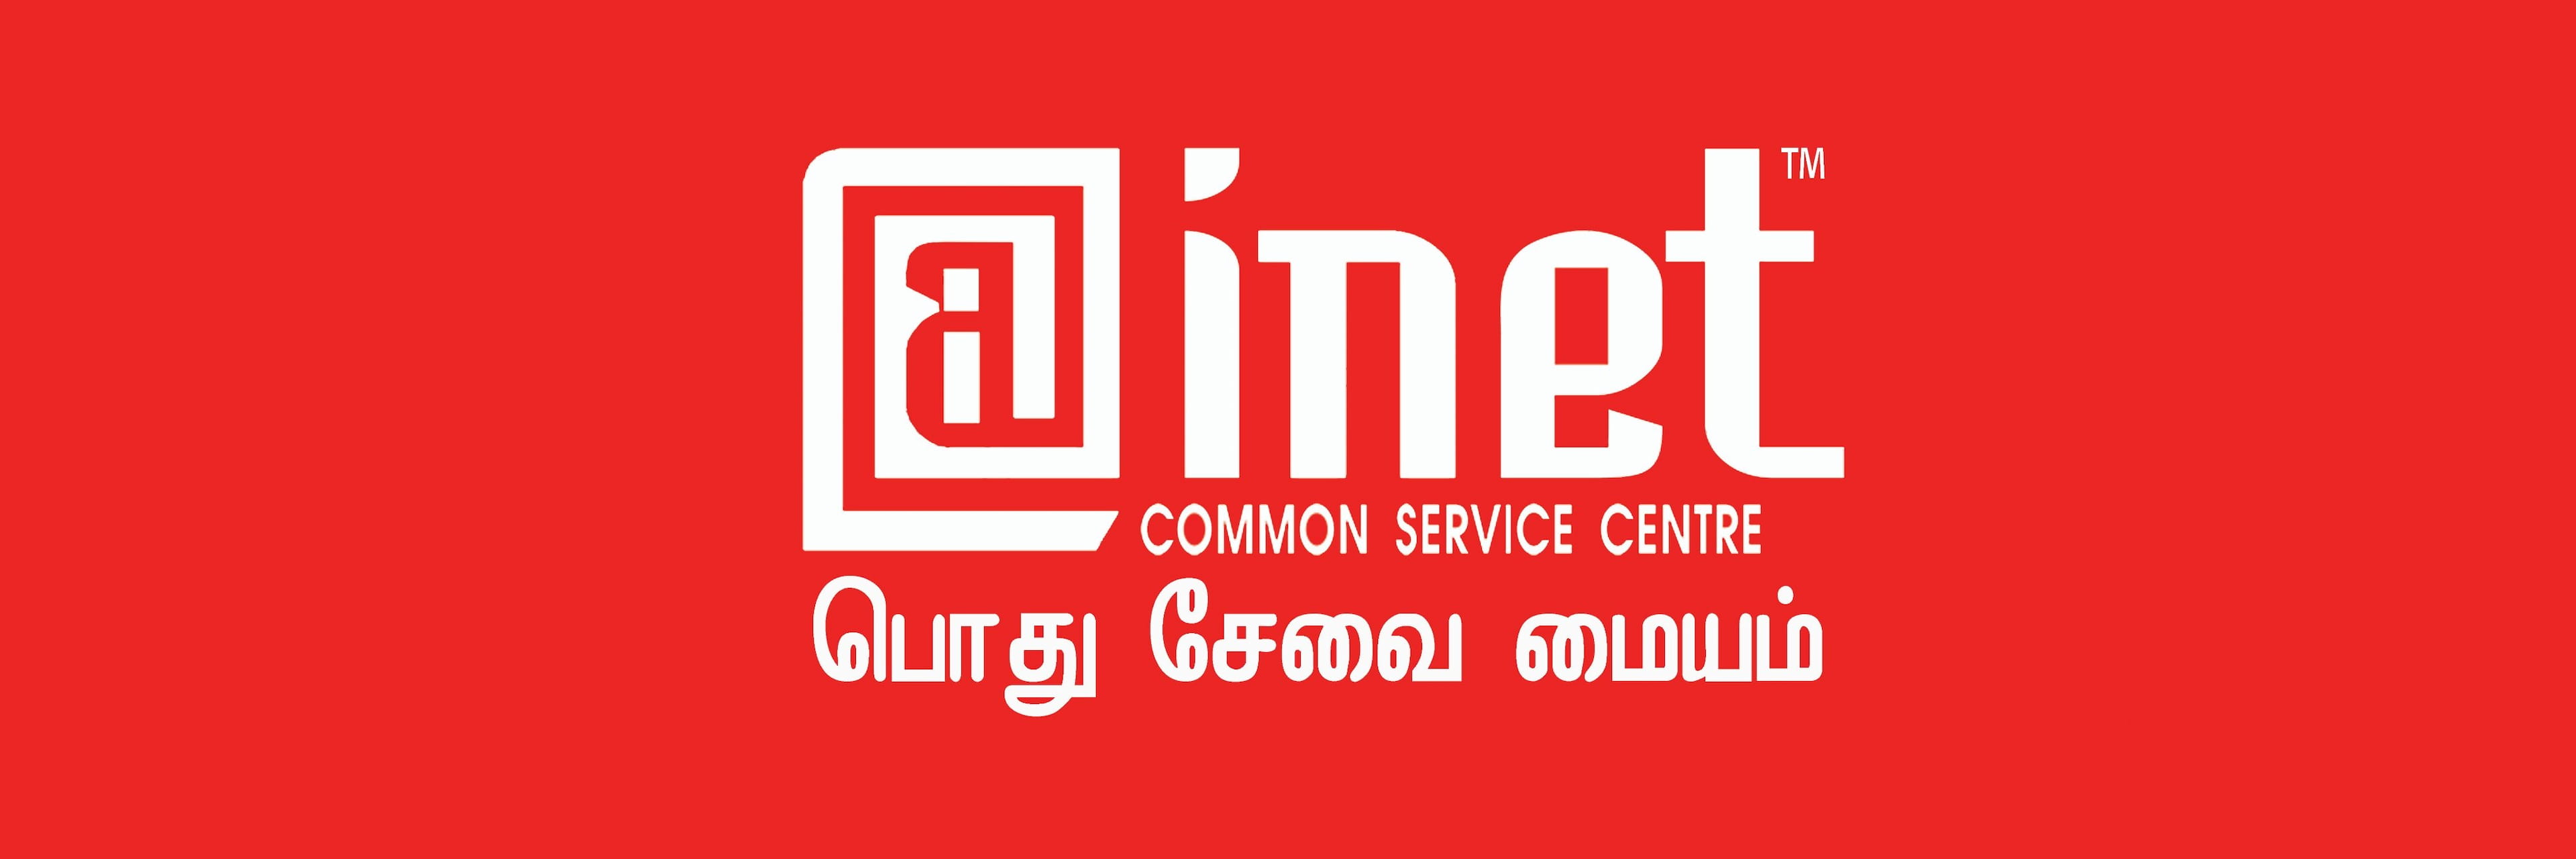 I-net secure labs pvt ltd cover picture